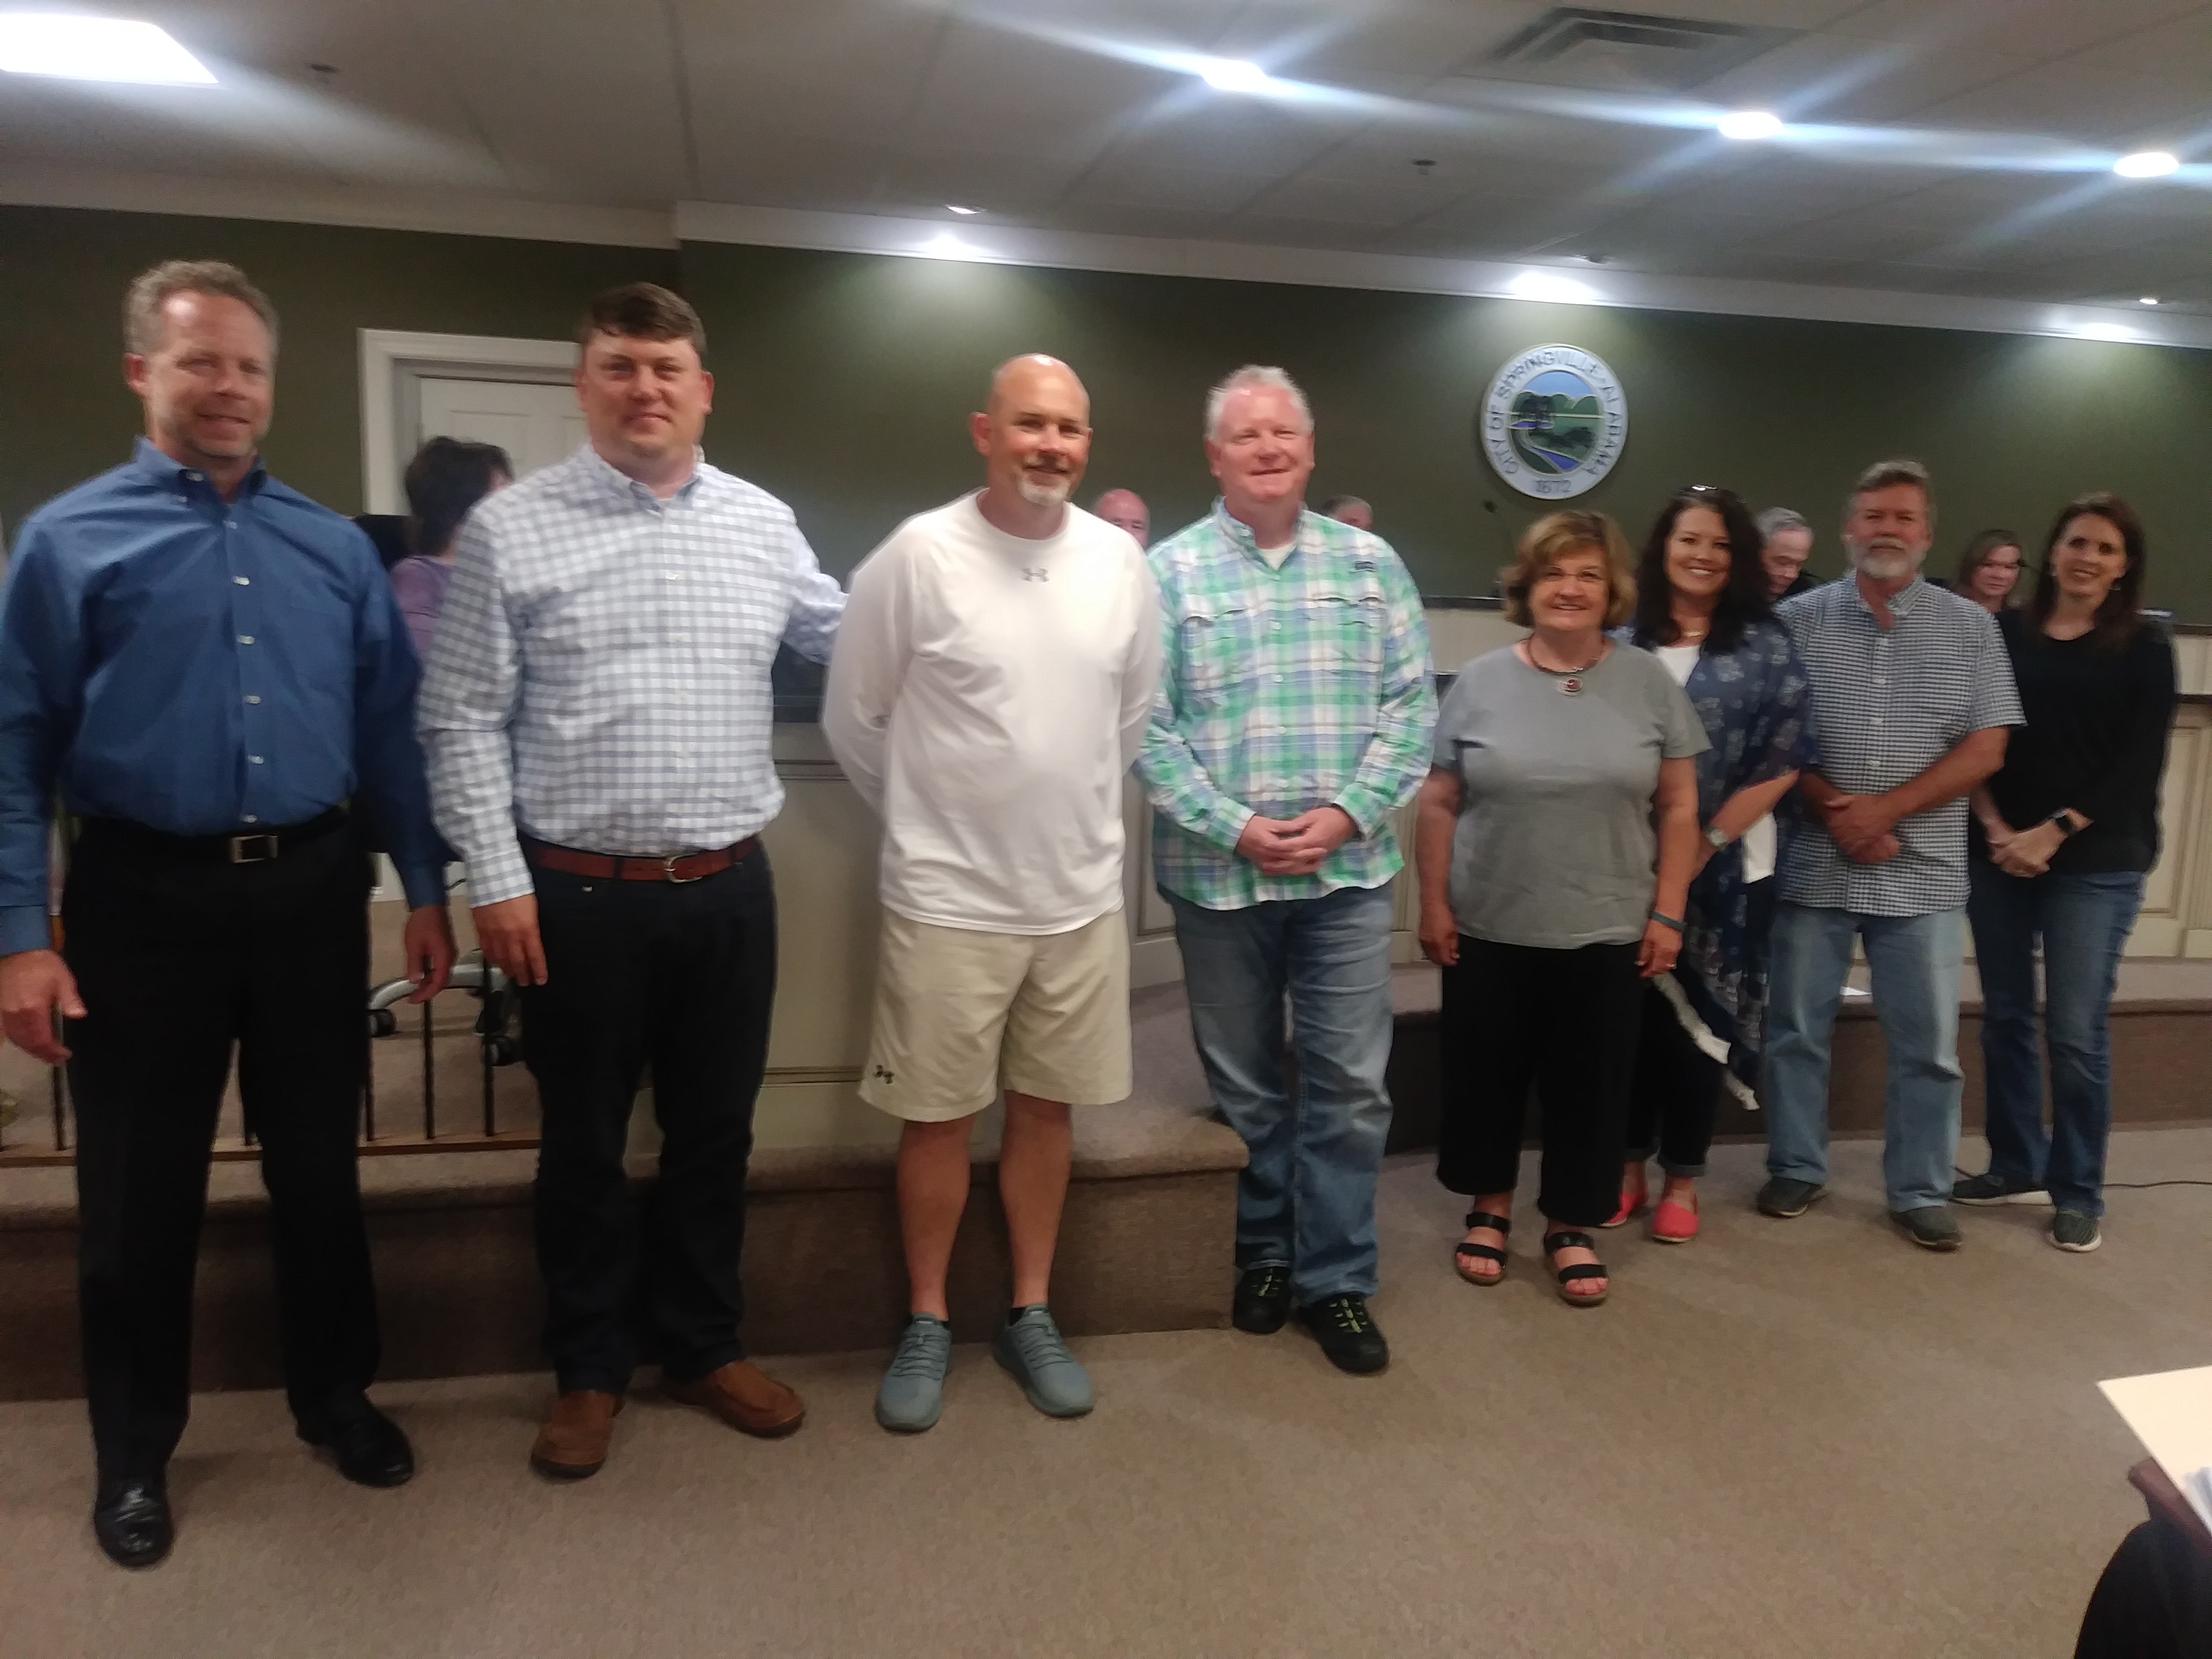 Ennis, Martin, Wingate elected officers of Springville's first park and recreation board